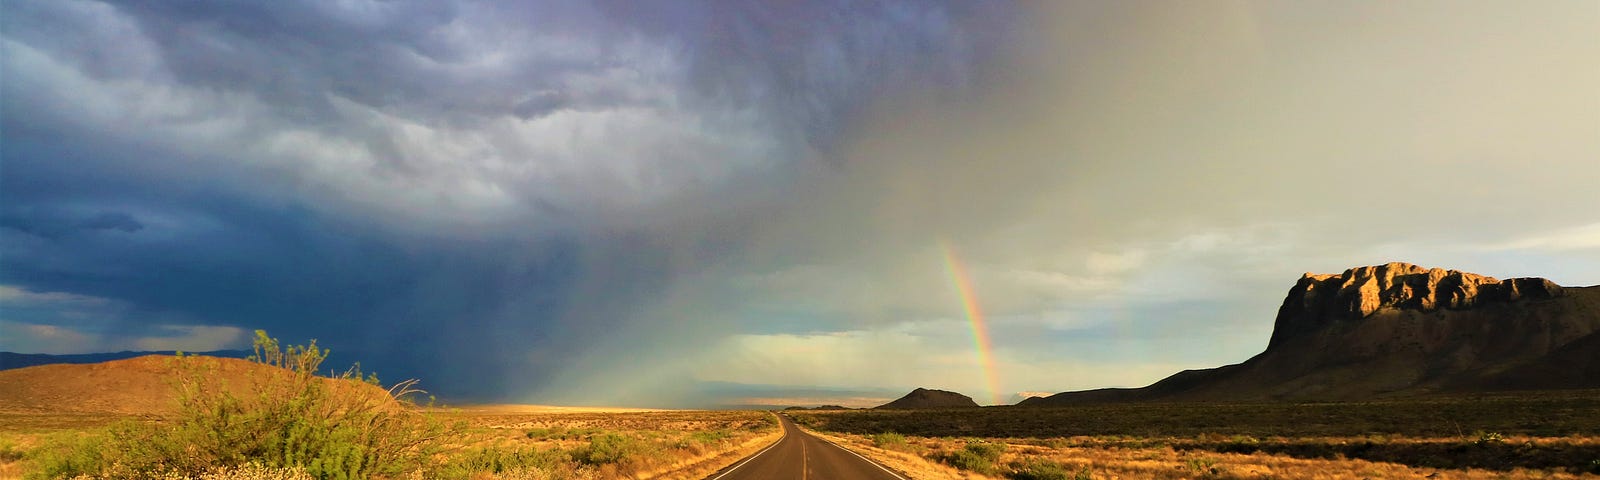 road with storm and a rainbow in the distance